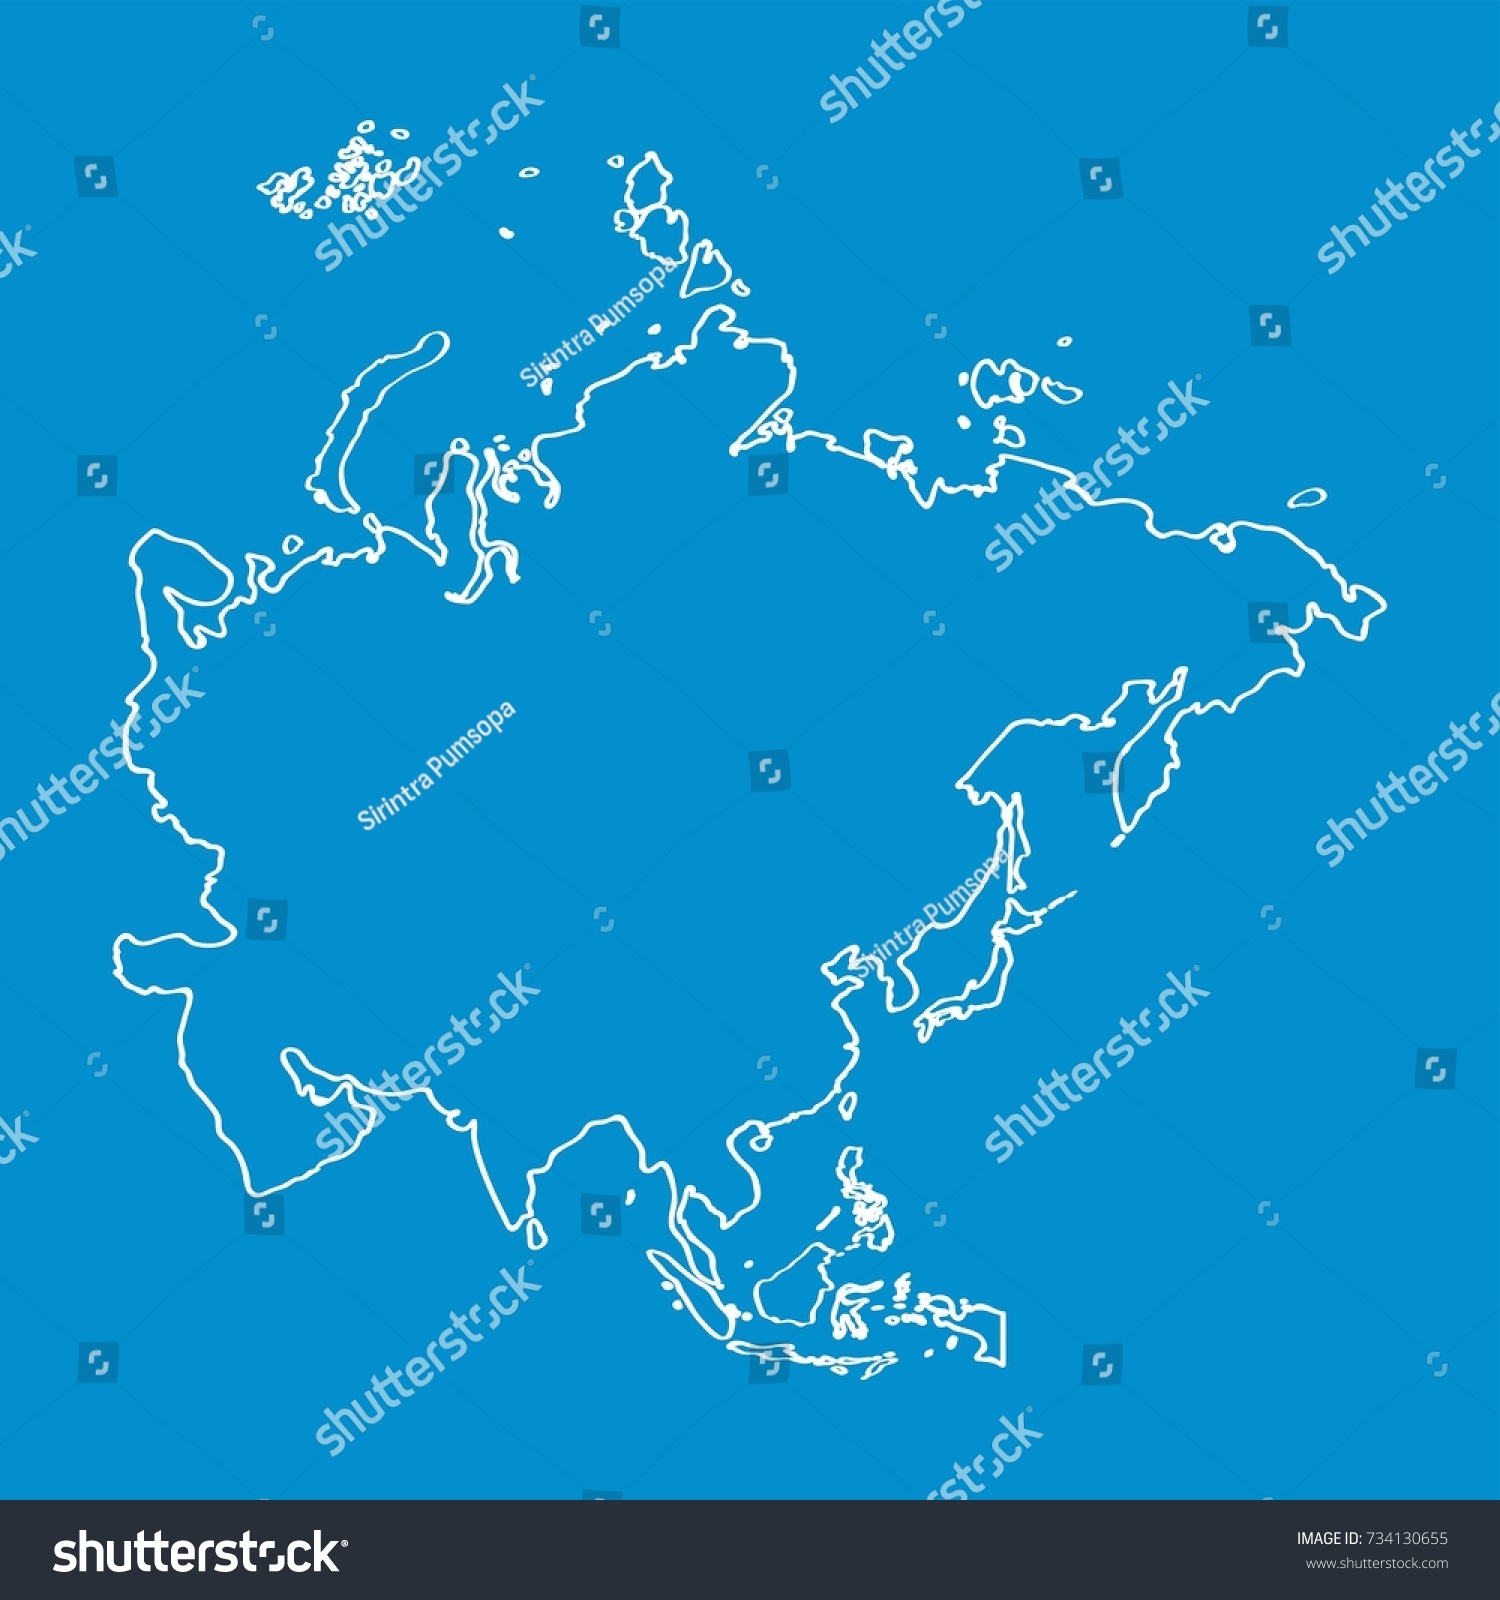 Asia Map Outline Graphic Freehand Drawing On Royalty Free Stock Vector 734130655 6315